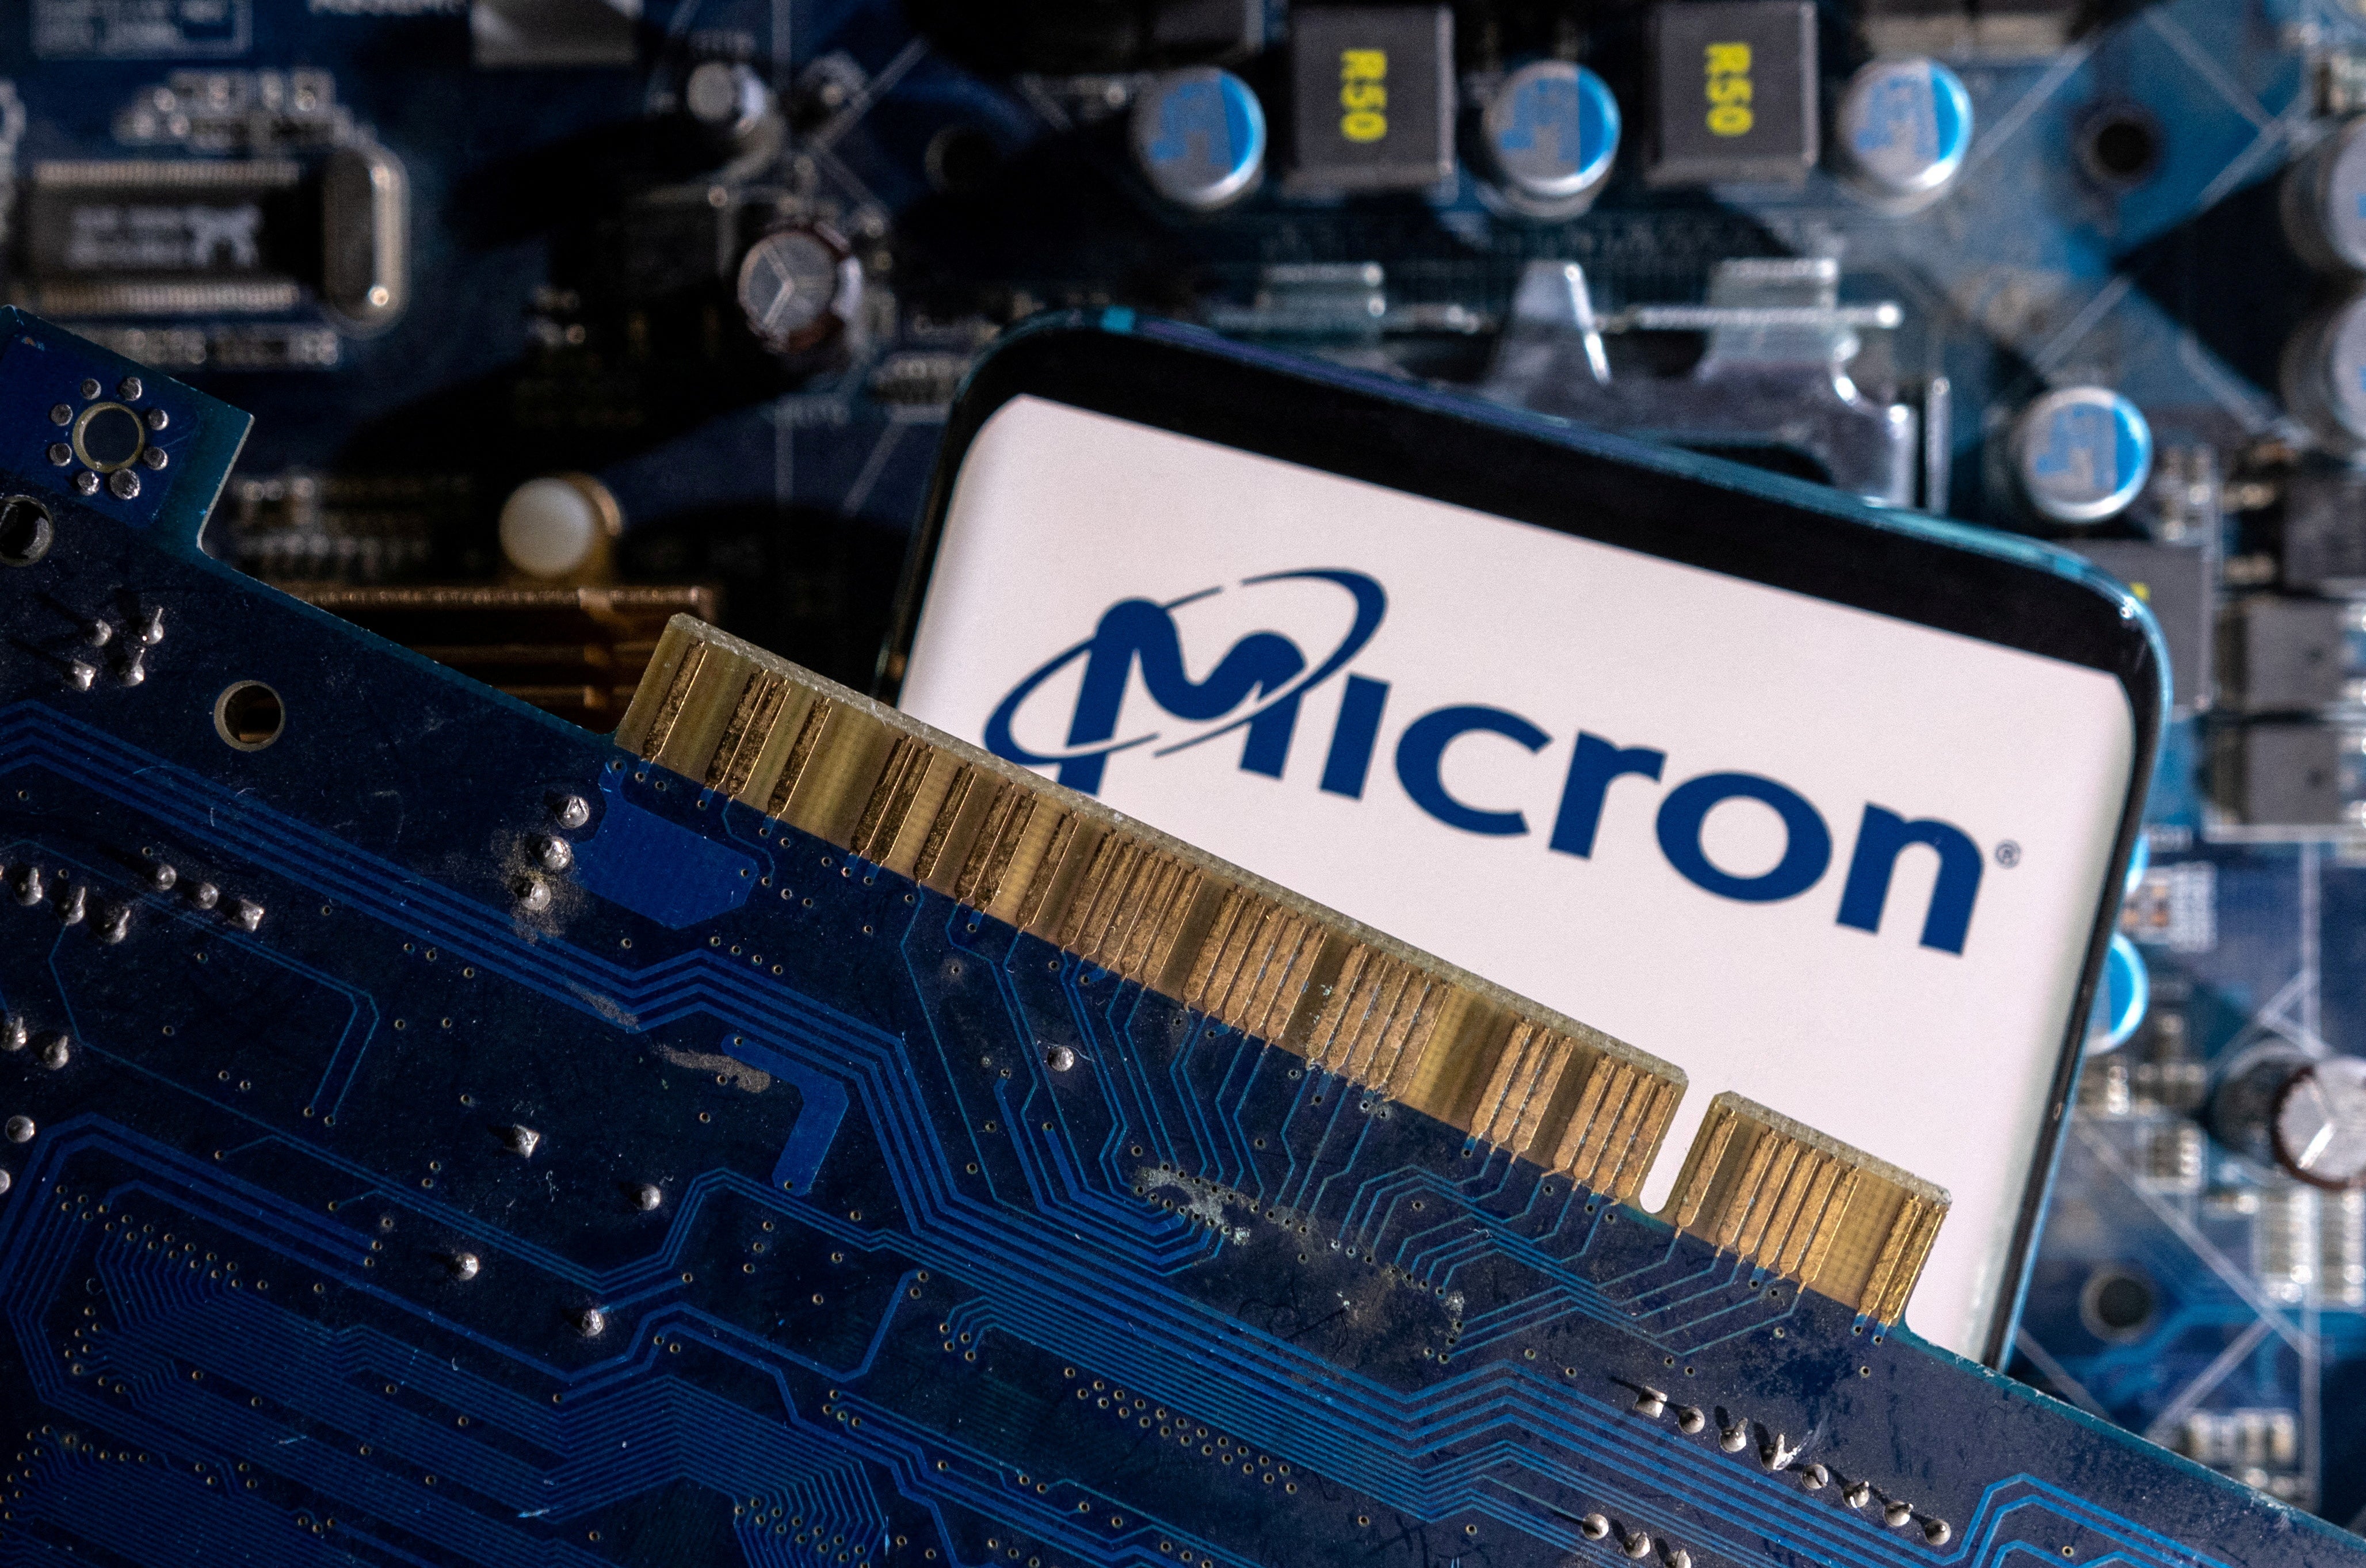 A smartphone with a displayed Micron logo is placed on a computer motherboard